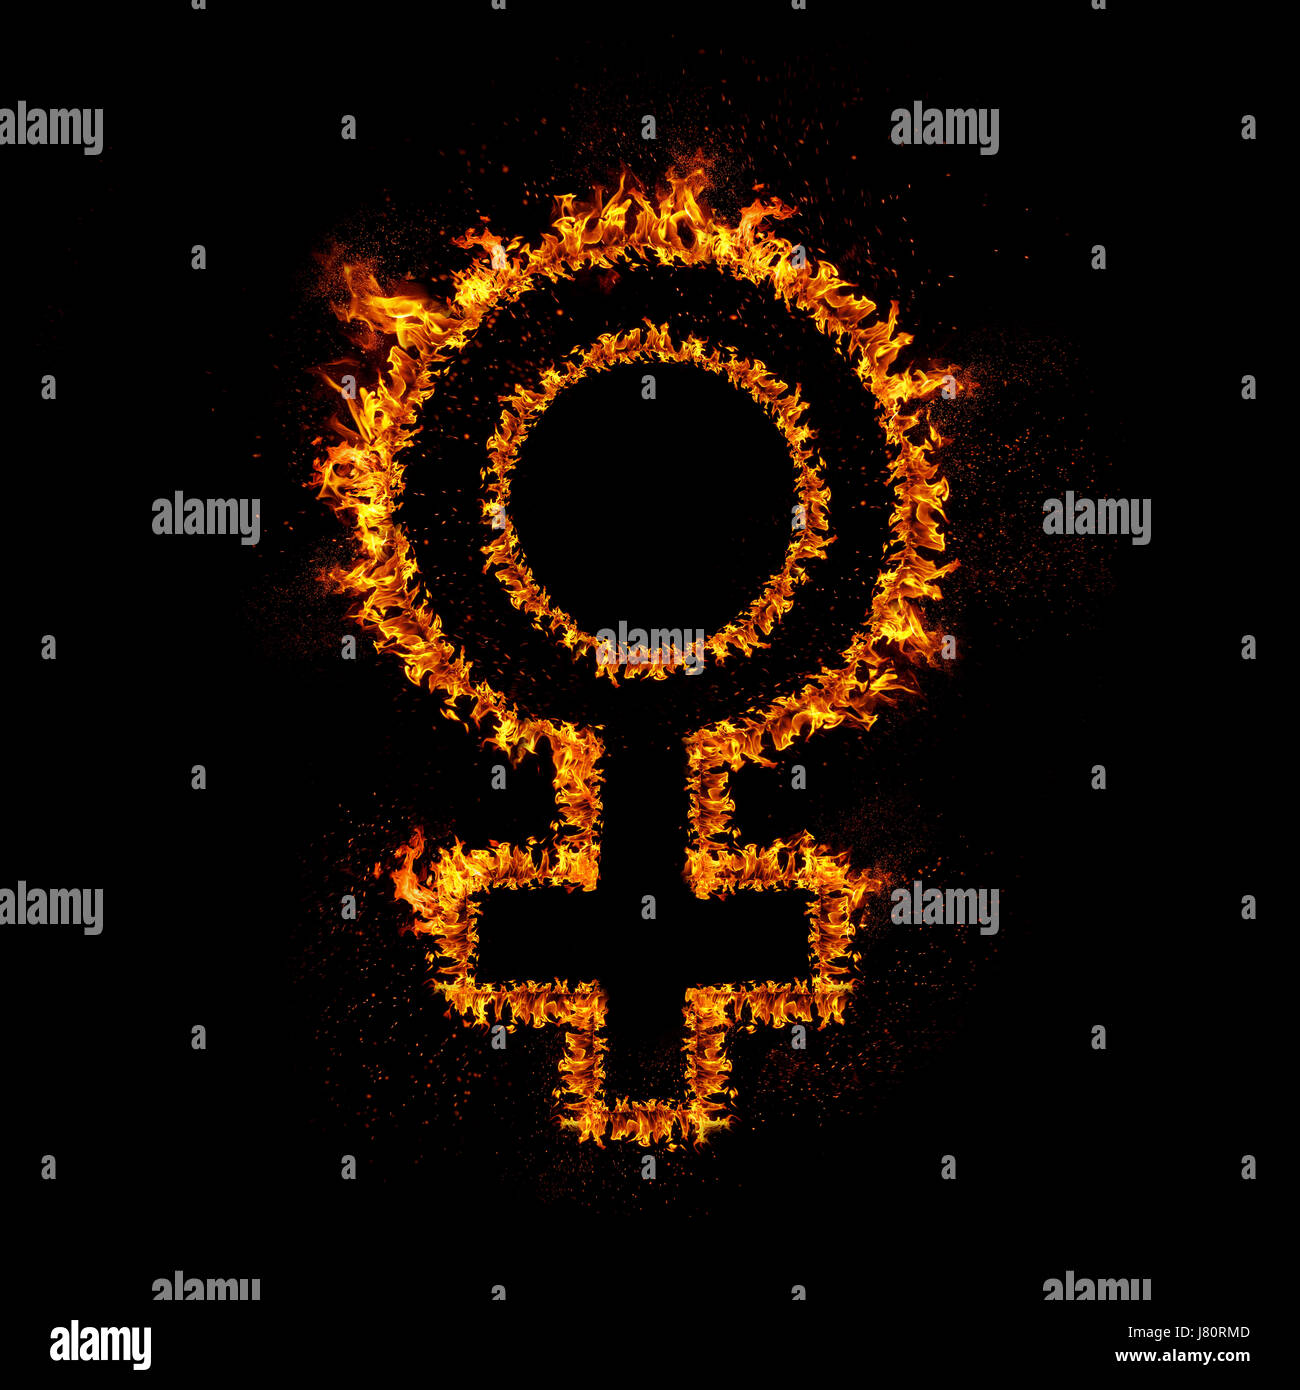 Female sign burning in flames, isolated on black background. Stock Photo